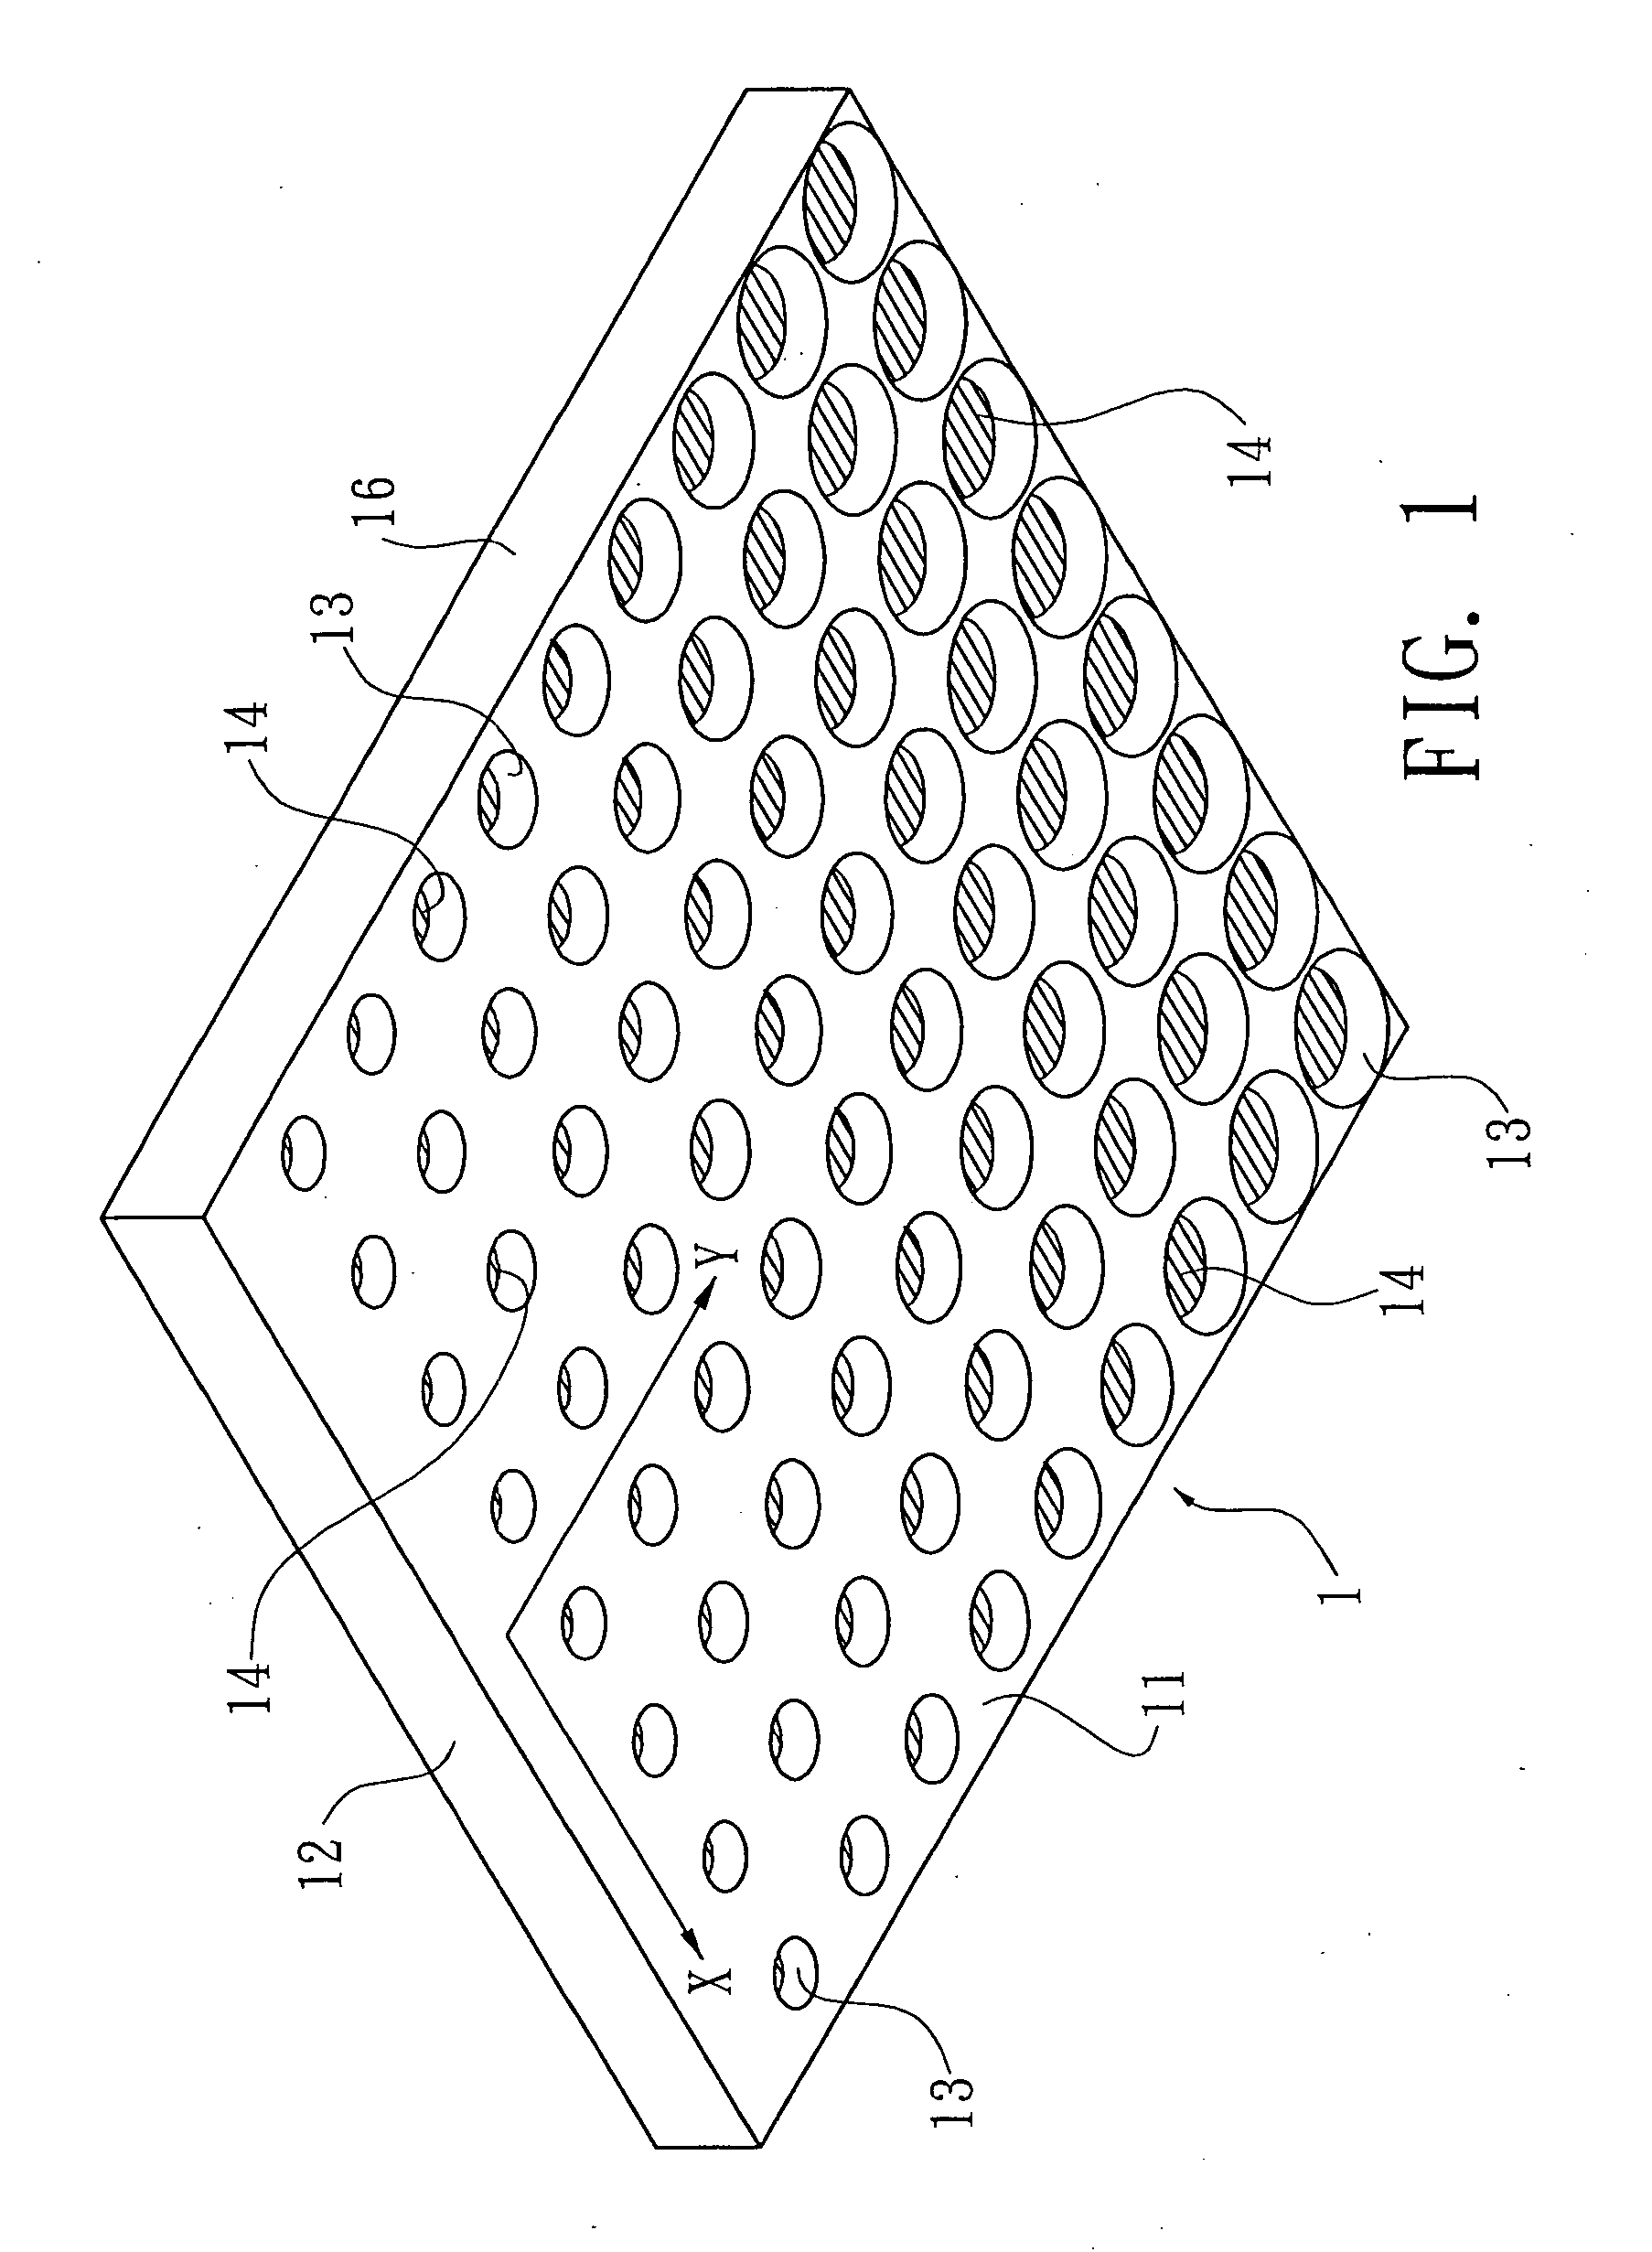 Dot structure of a light guide board